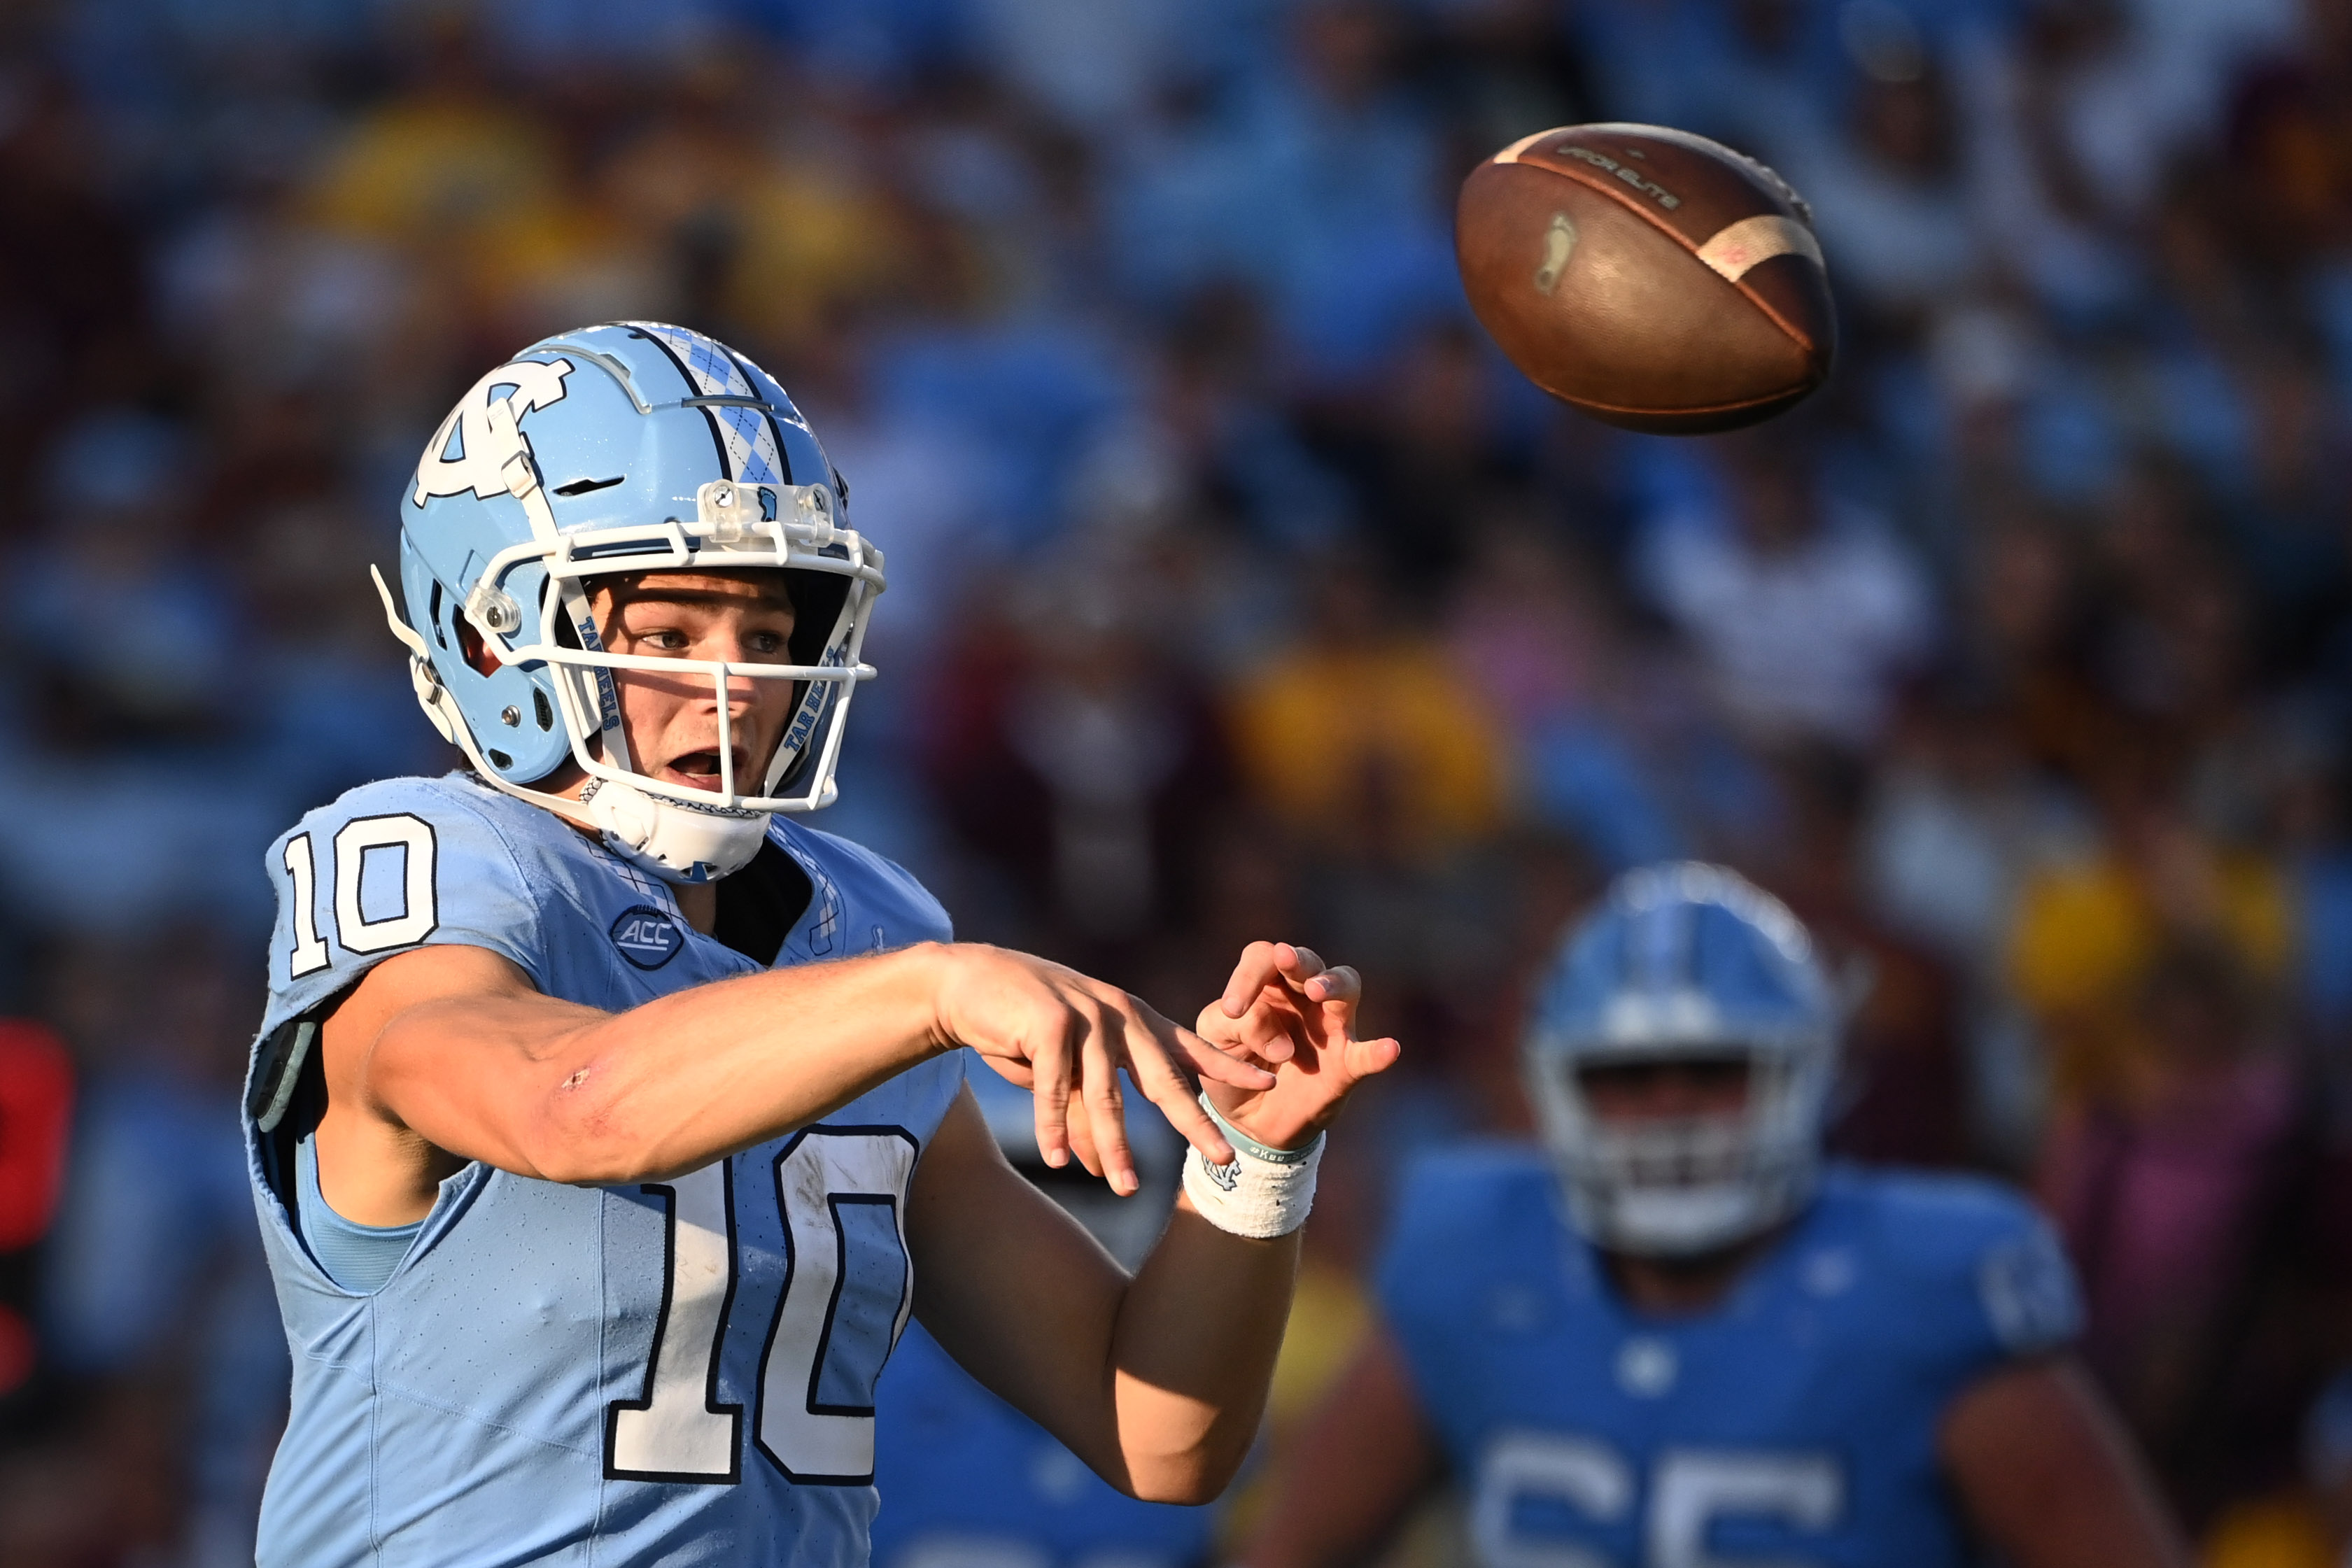 Drake Maye's Heisman hopes have new life with the arrival of talented target Nate McCollum